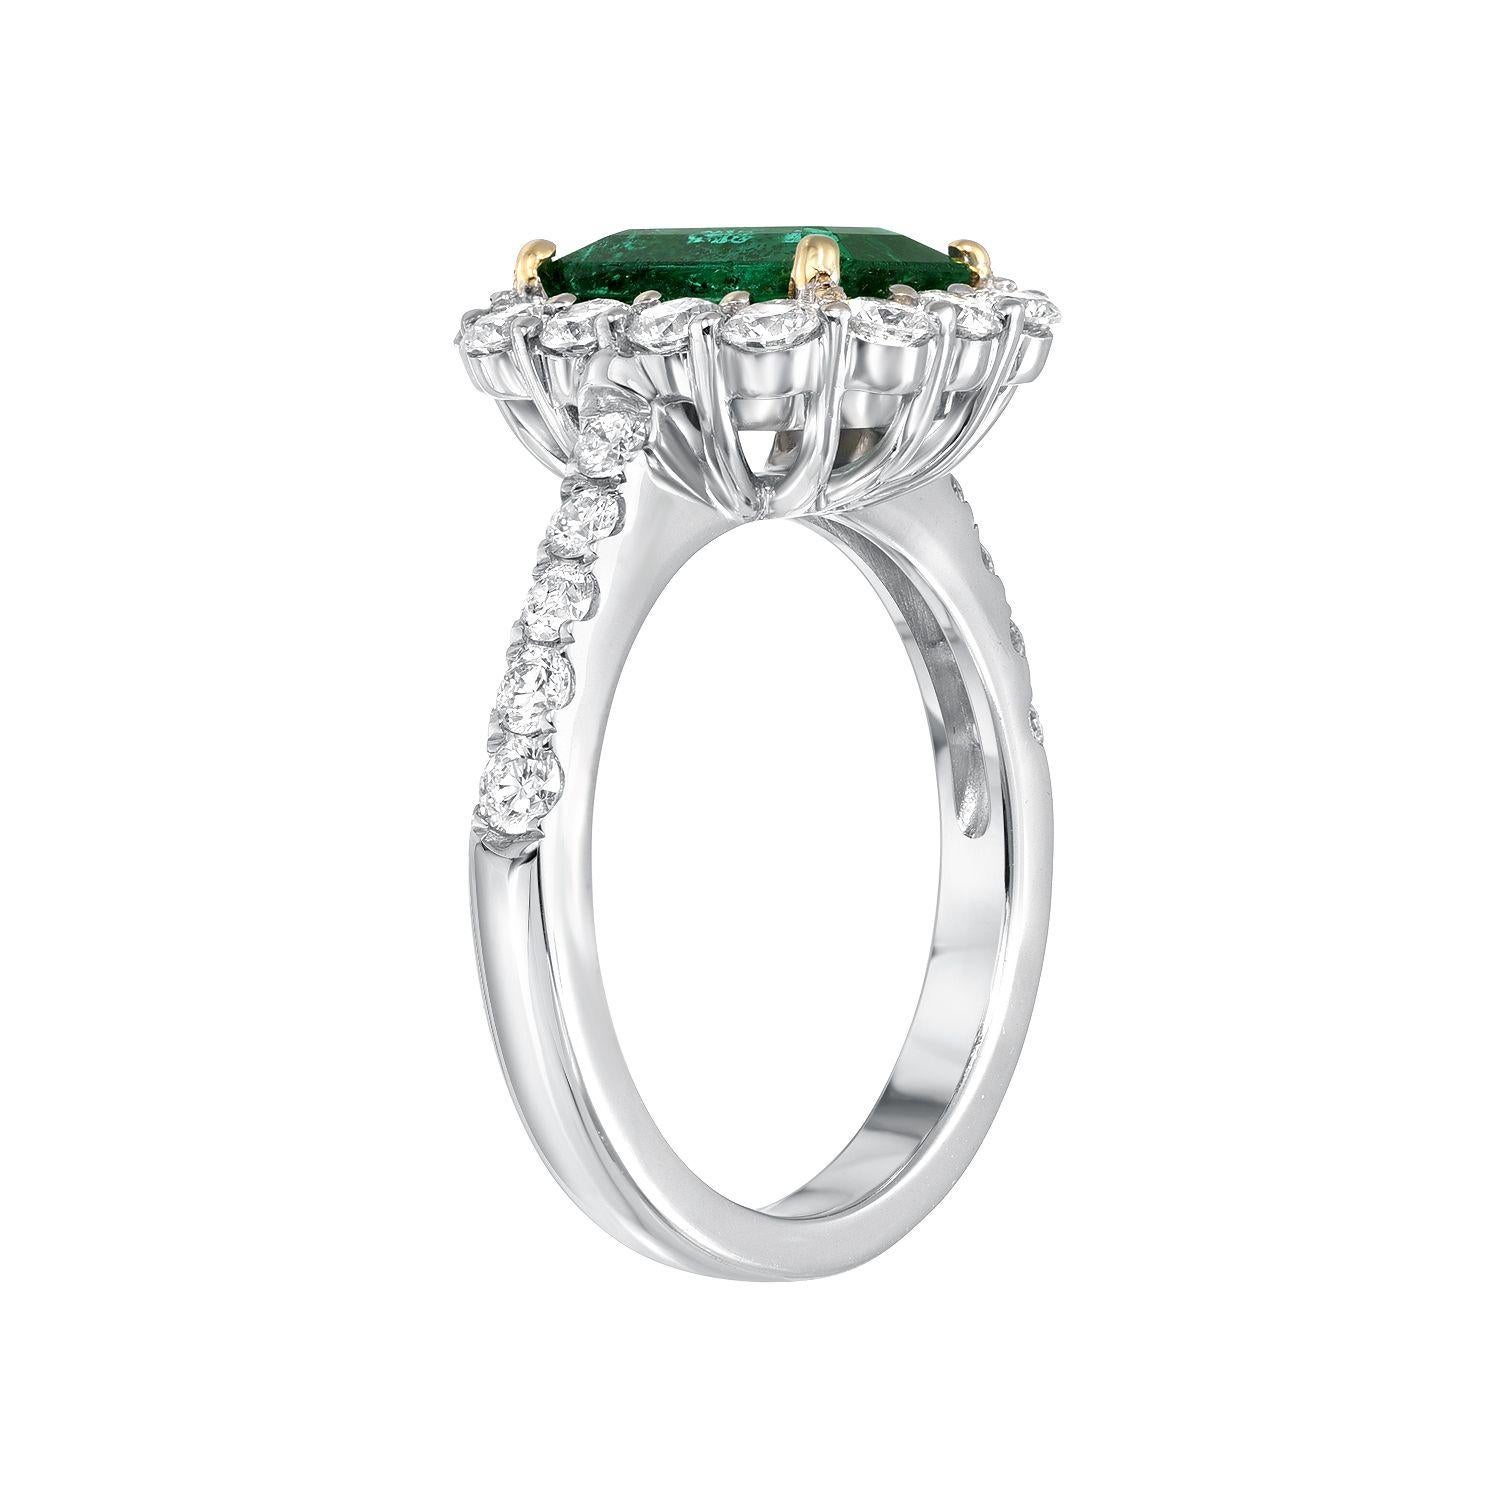 1.92 carat Emerald ring in 18K white and yellow gold, surrounded by round brilliant diamonds weighing a total of 1.07 carats.
Size 6.5. Re-sizing is complimentary upon request.
Returns are accepted and paid by us within 7 days of delivery.

Emerald